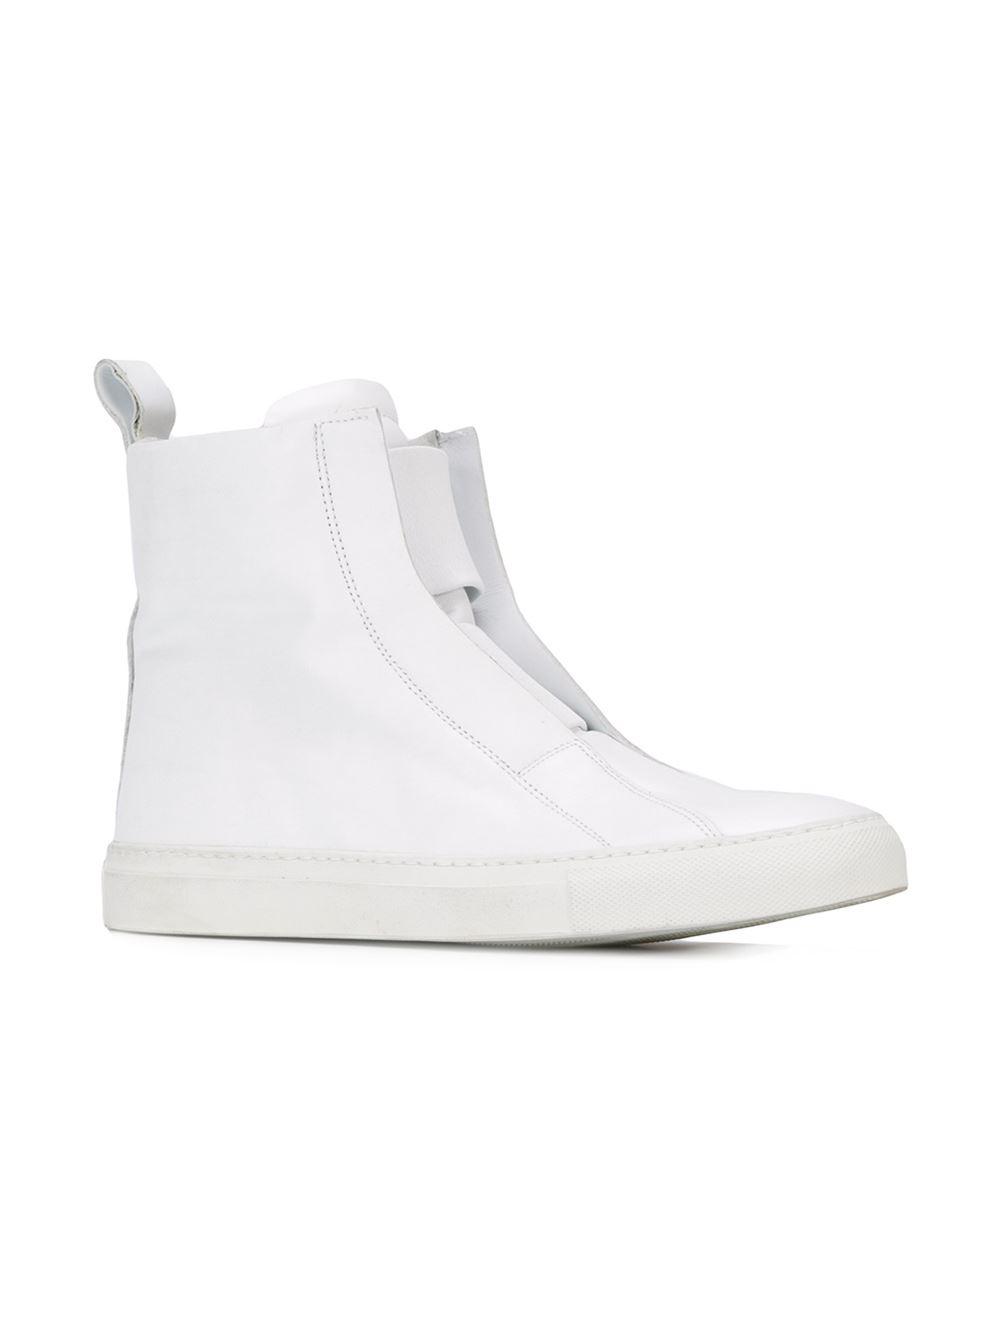 Odeur Leather Laceless Hi-top Sneakers in White - Lyst